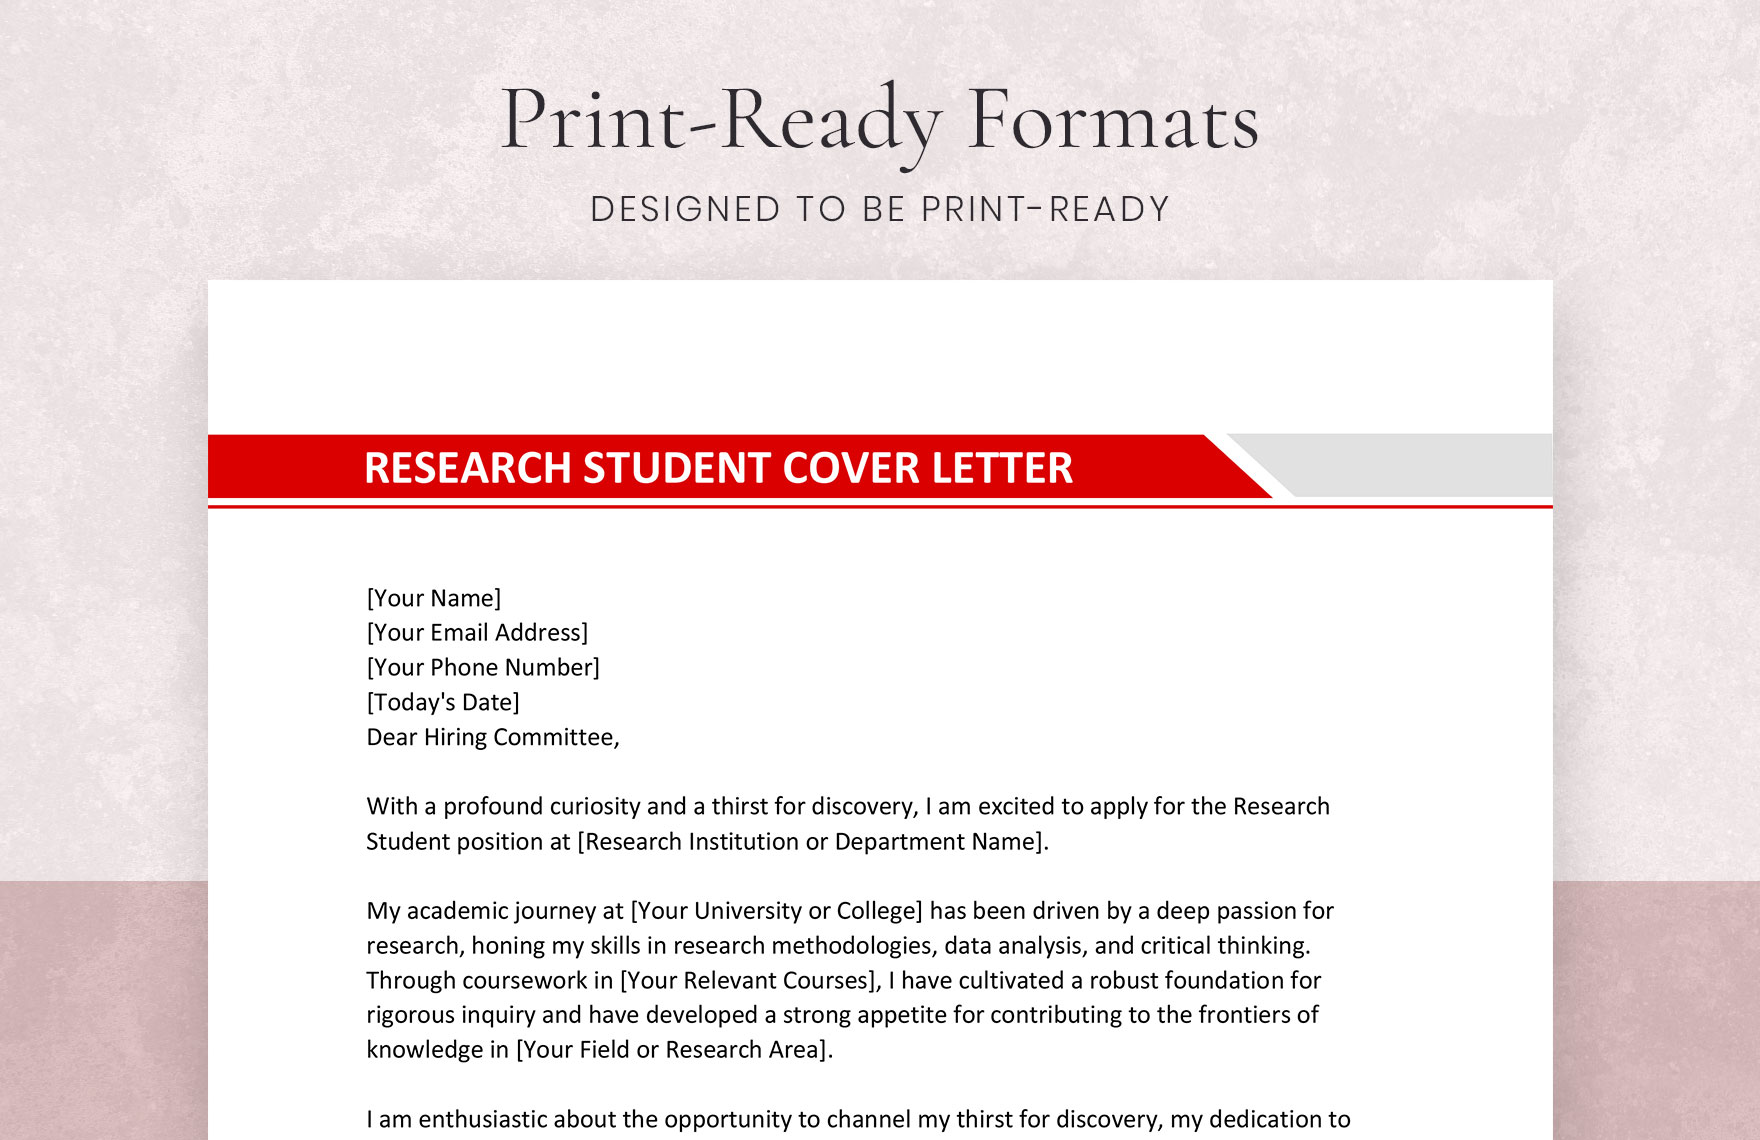 Research Student Cover Letter